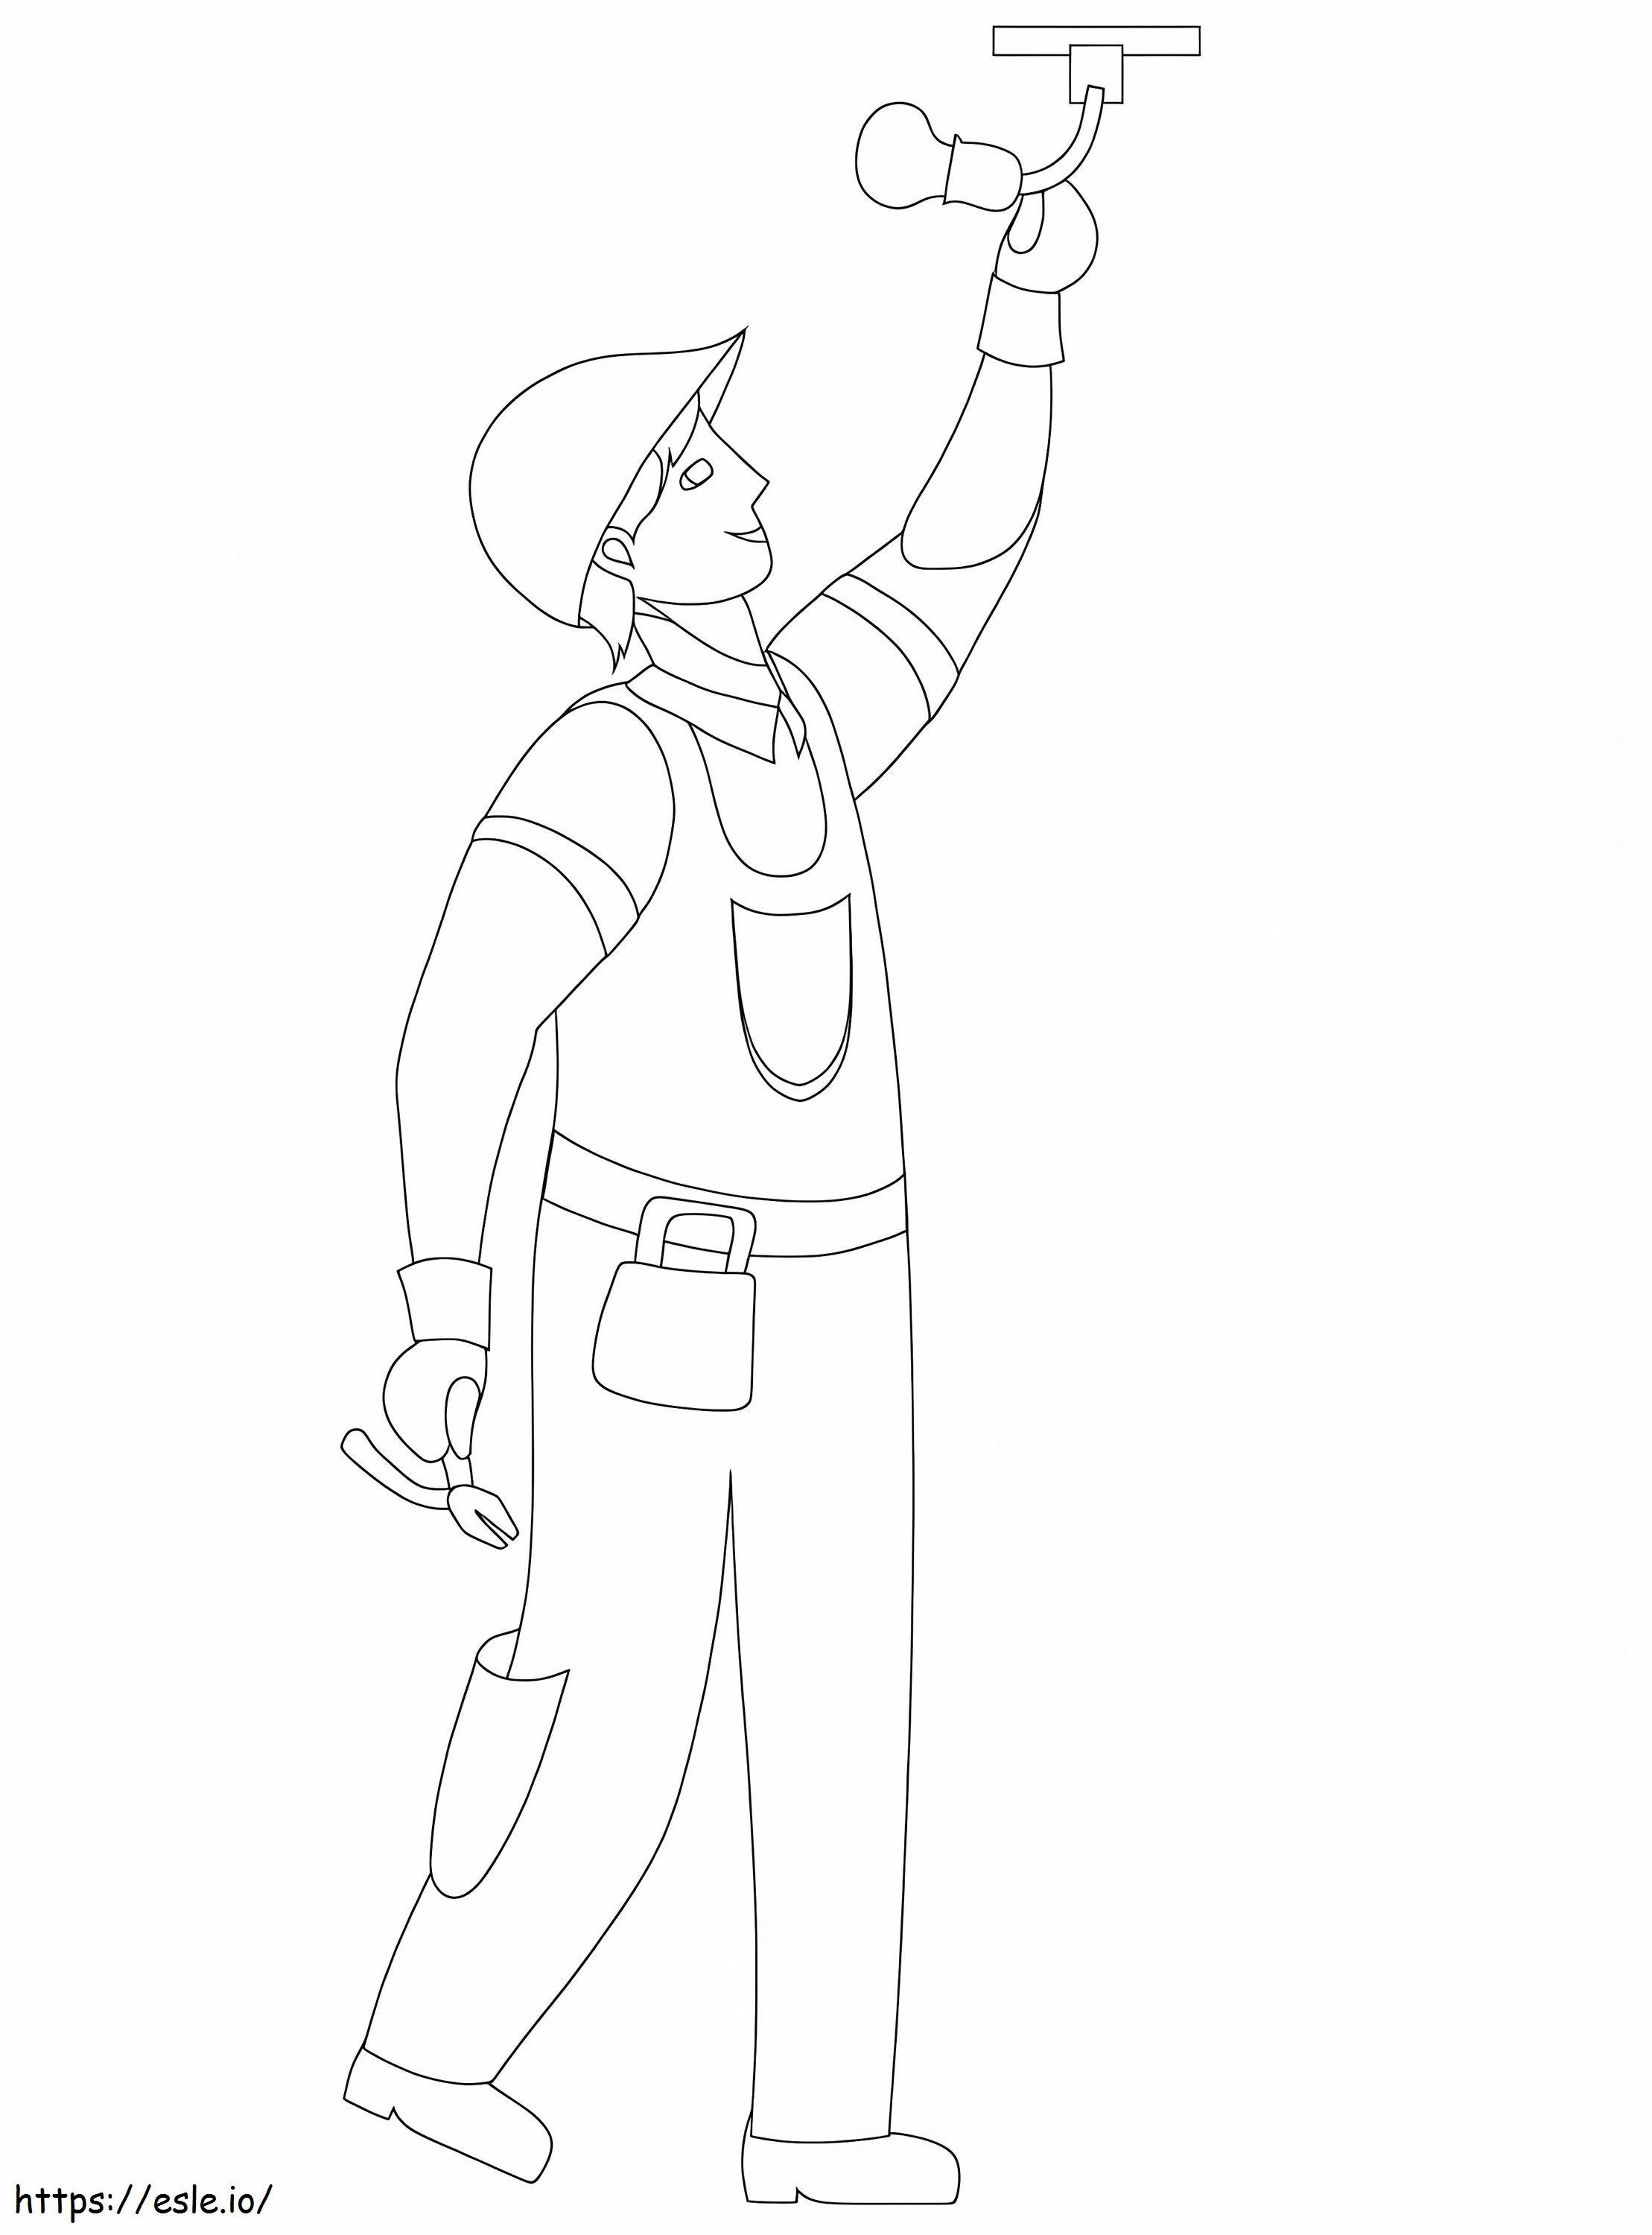 Electrician 5 coloring page